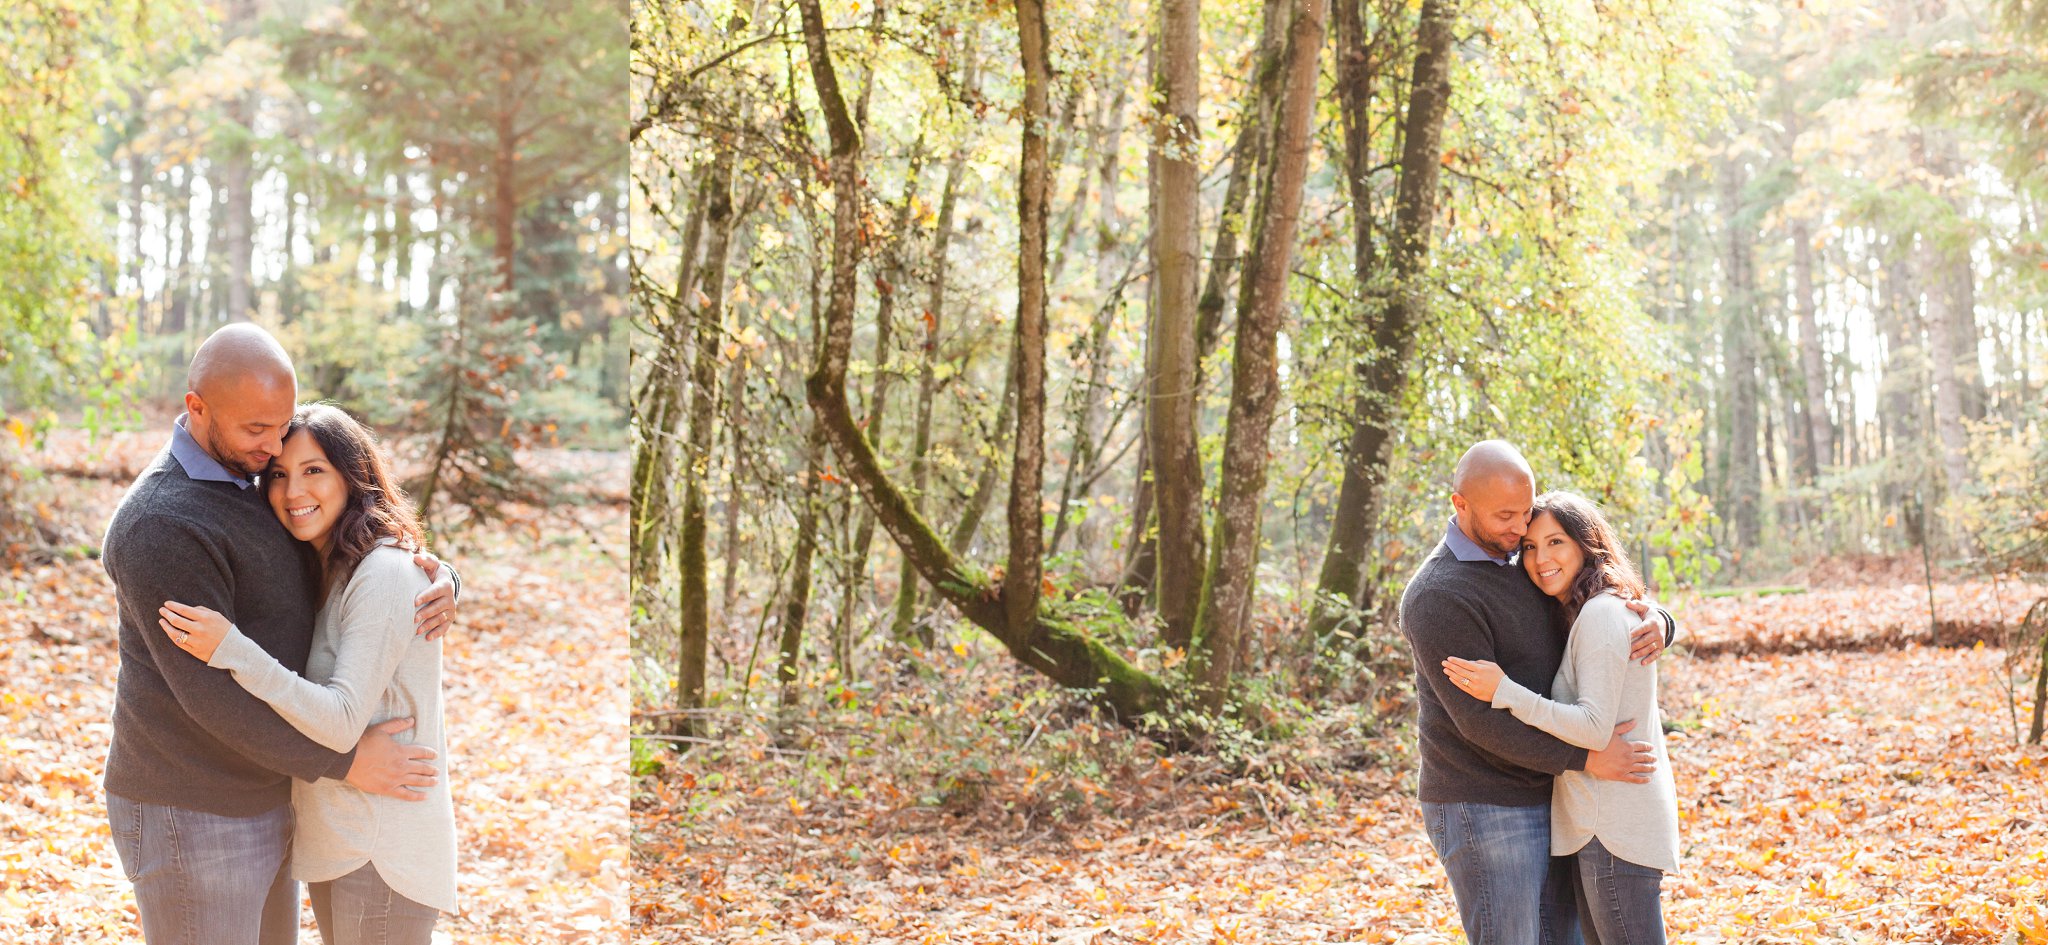 Jenkins Estate fall Family Photo Session with a dog | Hillsboro, OR Family Photographer